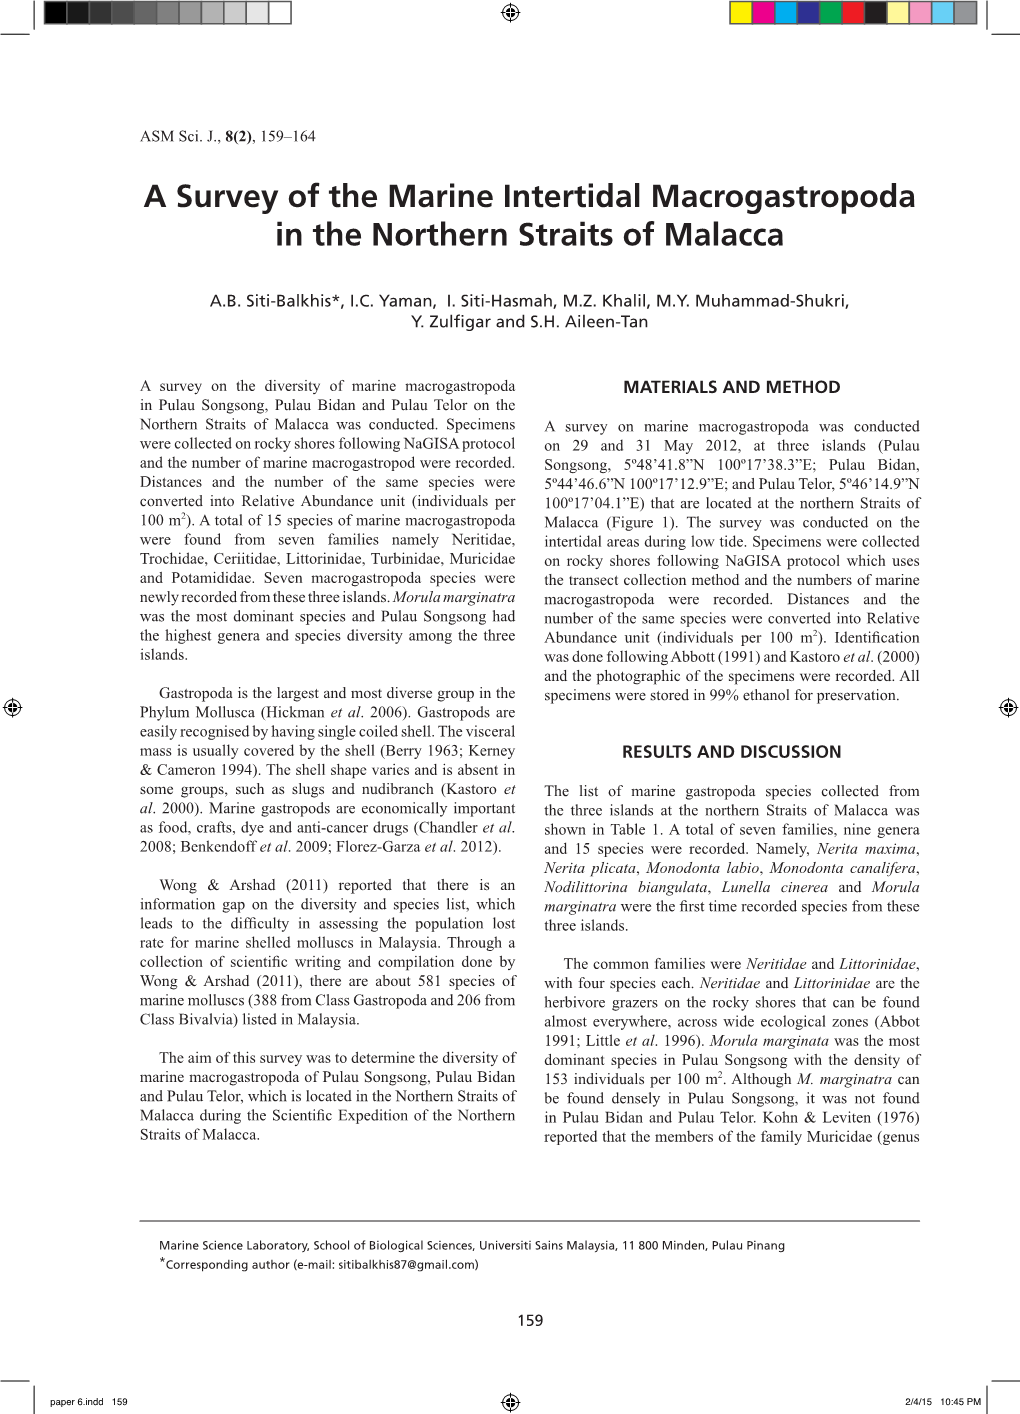 A Survey of the Marine Intertidal Macrogastropoda in the Northern Straits of Malacca